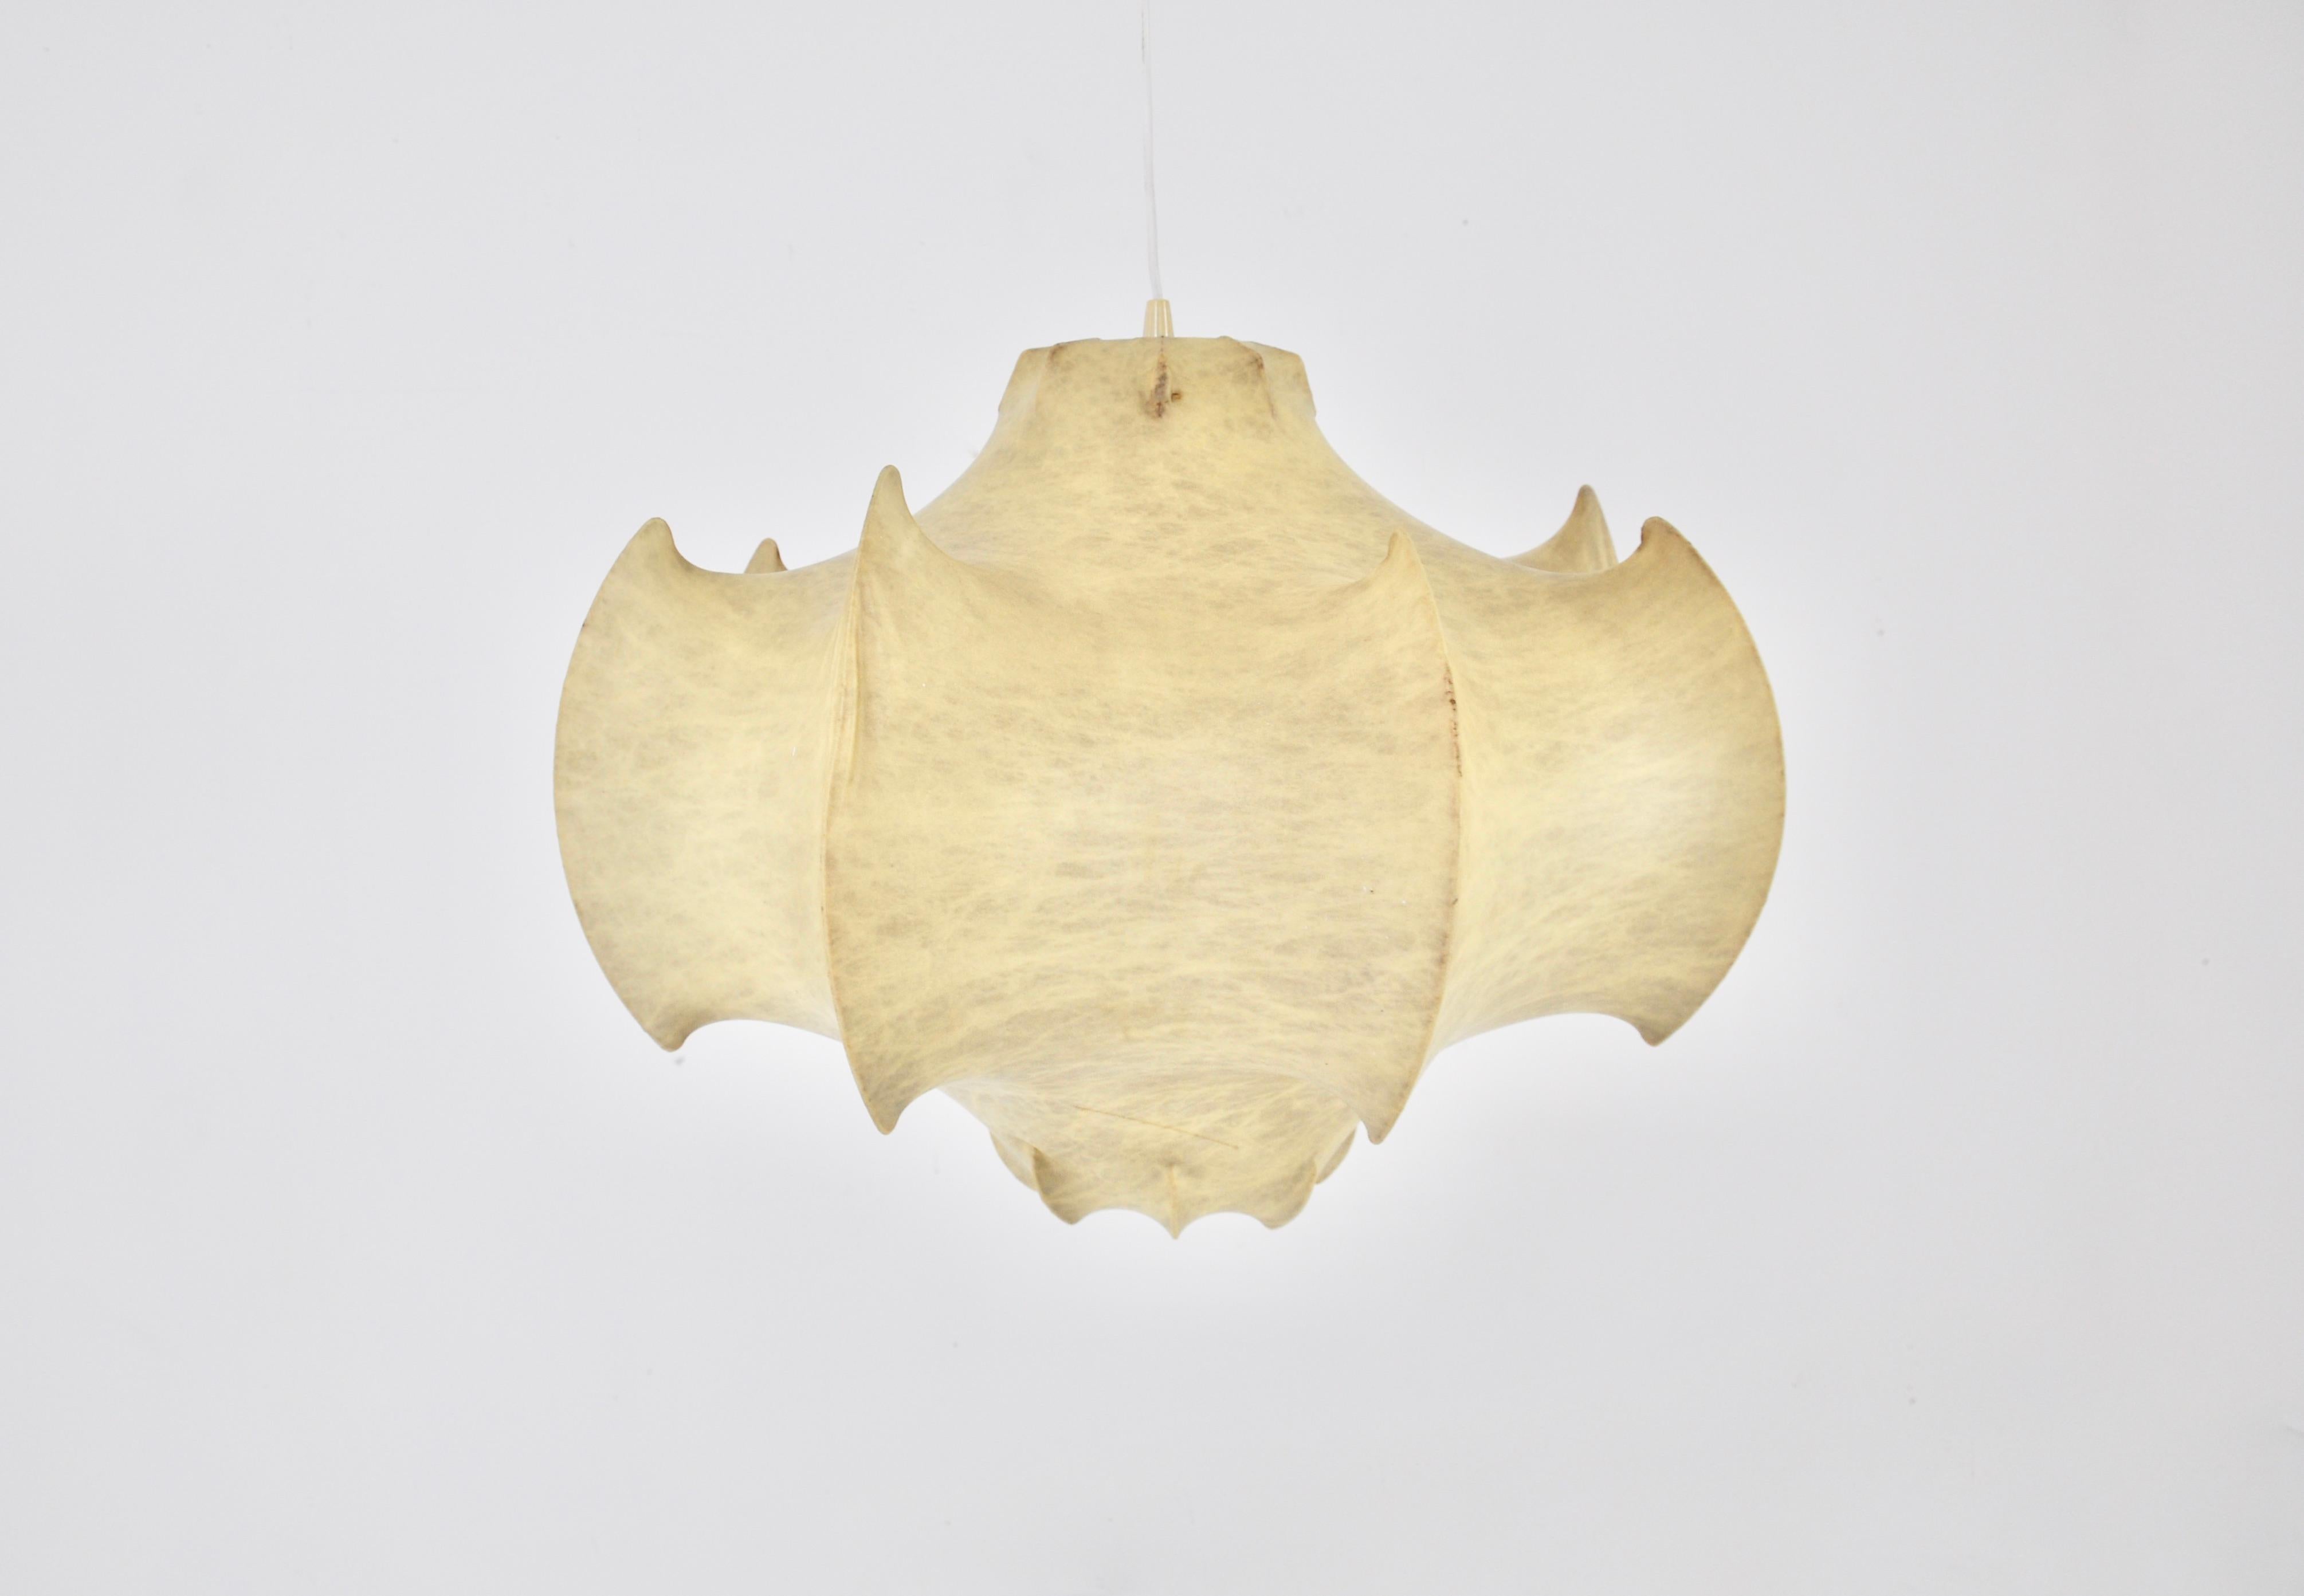 Cocoon chandelier by Achille Castiglioni for Flos in 1960s. Good condition. Wear due to time and age of the lamp.